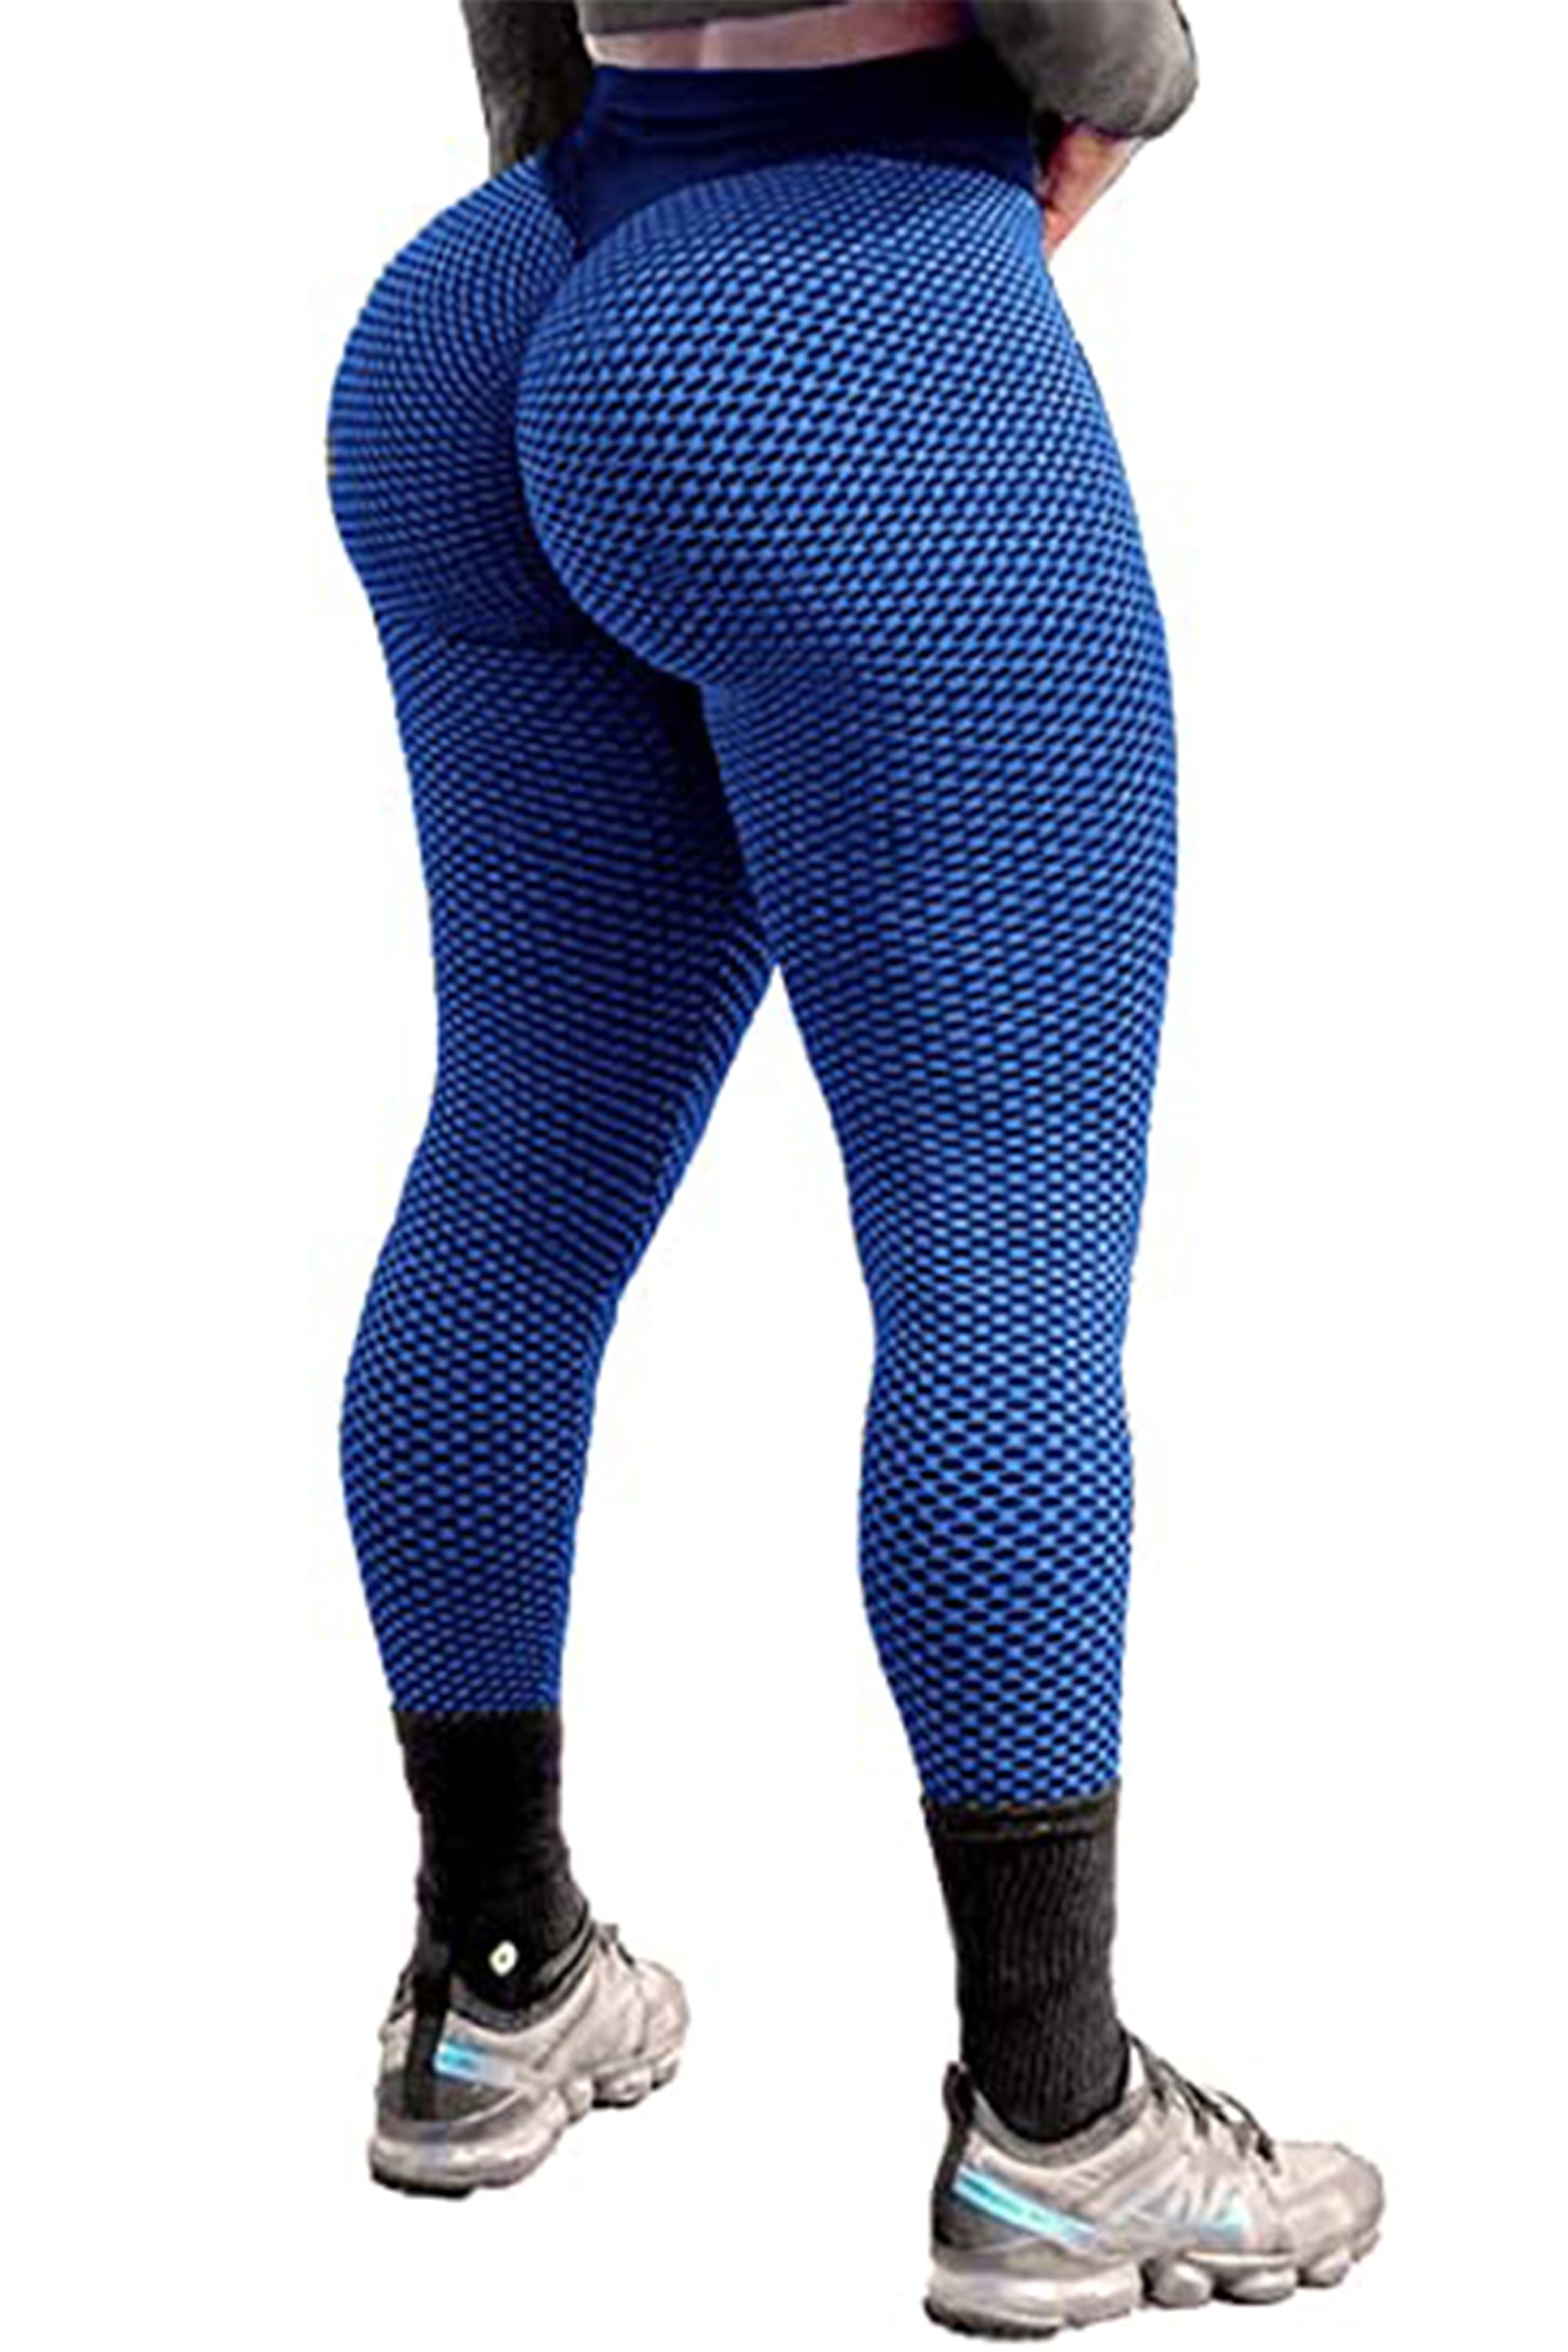 FITTOO Sexy Women Booty Yoga Pants High Waisted Honeycomb Ruched Butt Lift  Textured Tummy Control Scrunch Leggings 